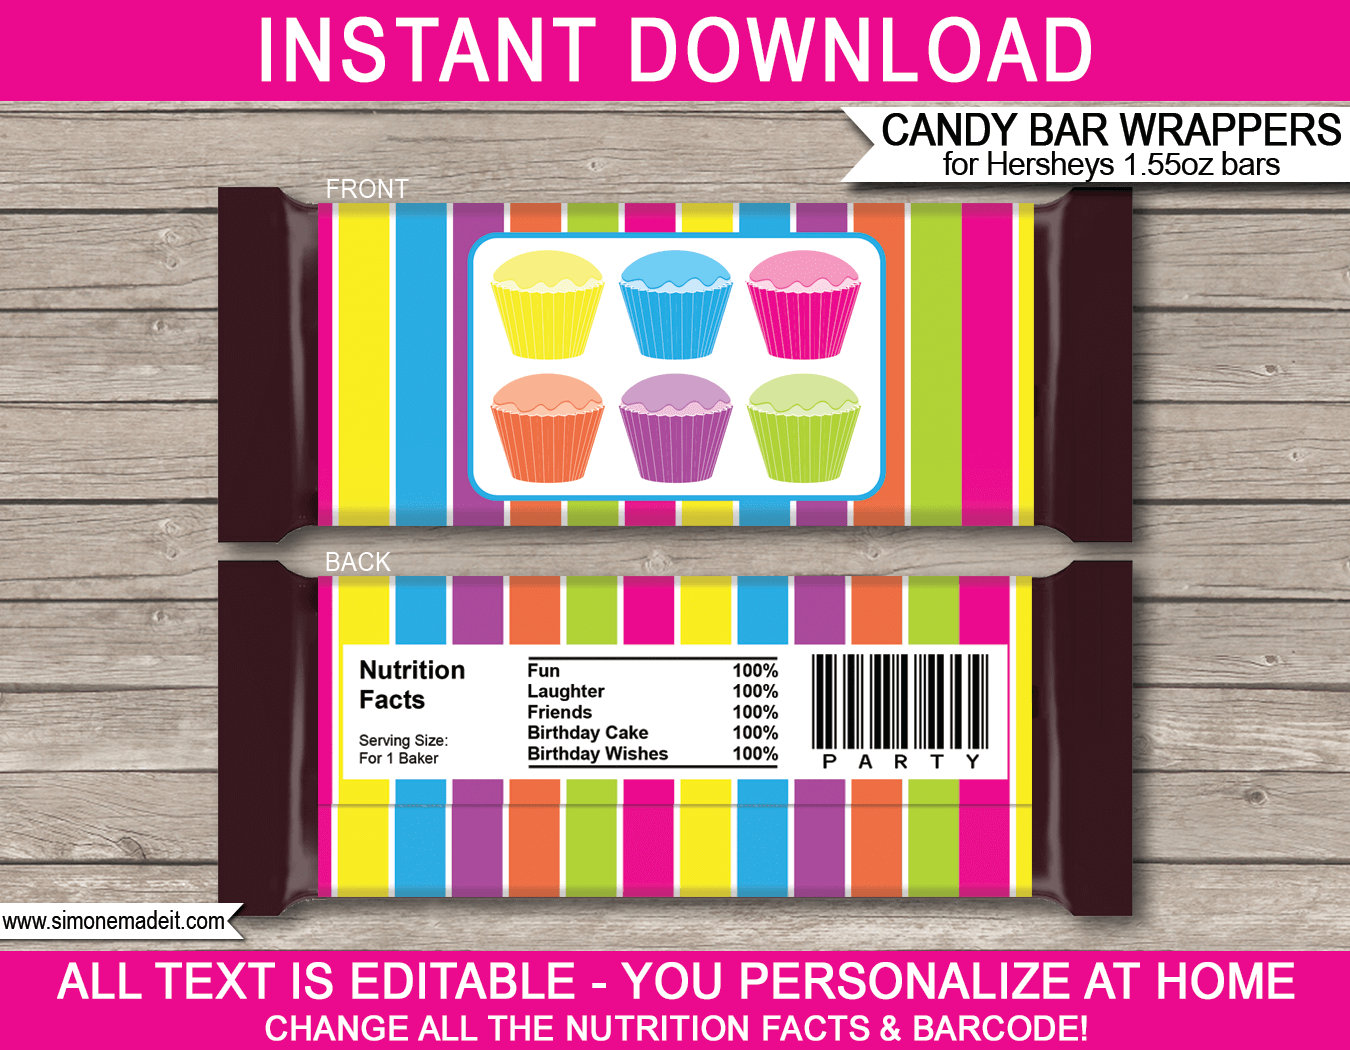 Cupcake Hershey Candy Bar Wrappers | Birthday Party Favors | Personalized Candy Bars | Editable Template | INSTANT DOWNLOAD $3.00 via simonemadeit.com